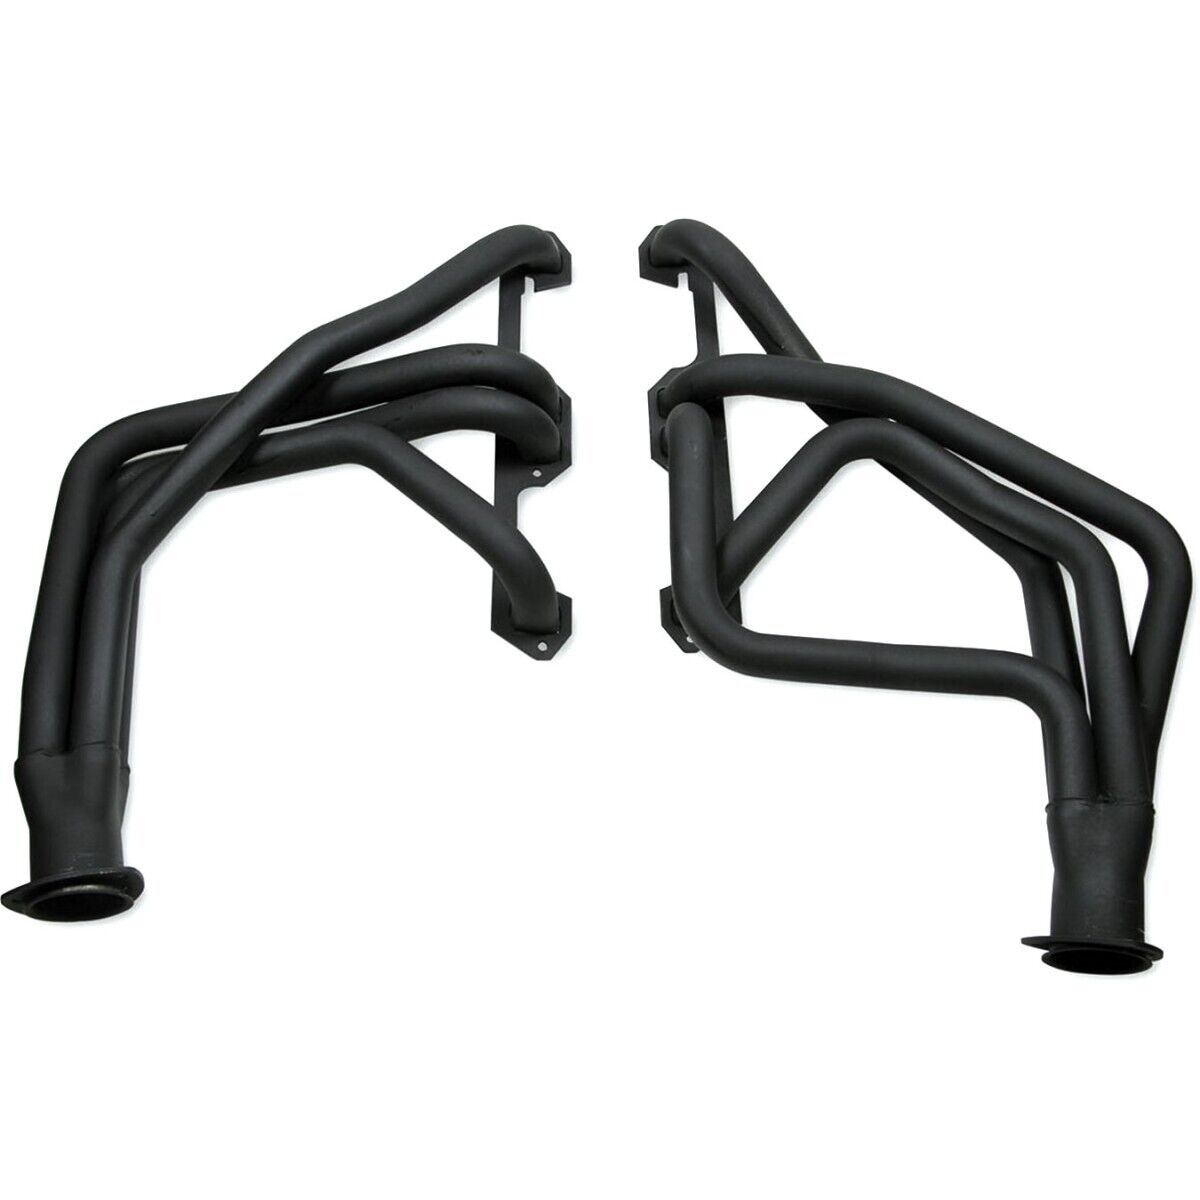 13130FLT Flowtech Headers Set of 2 for Dodge Charger Challenger Satellite Pair